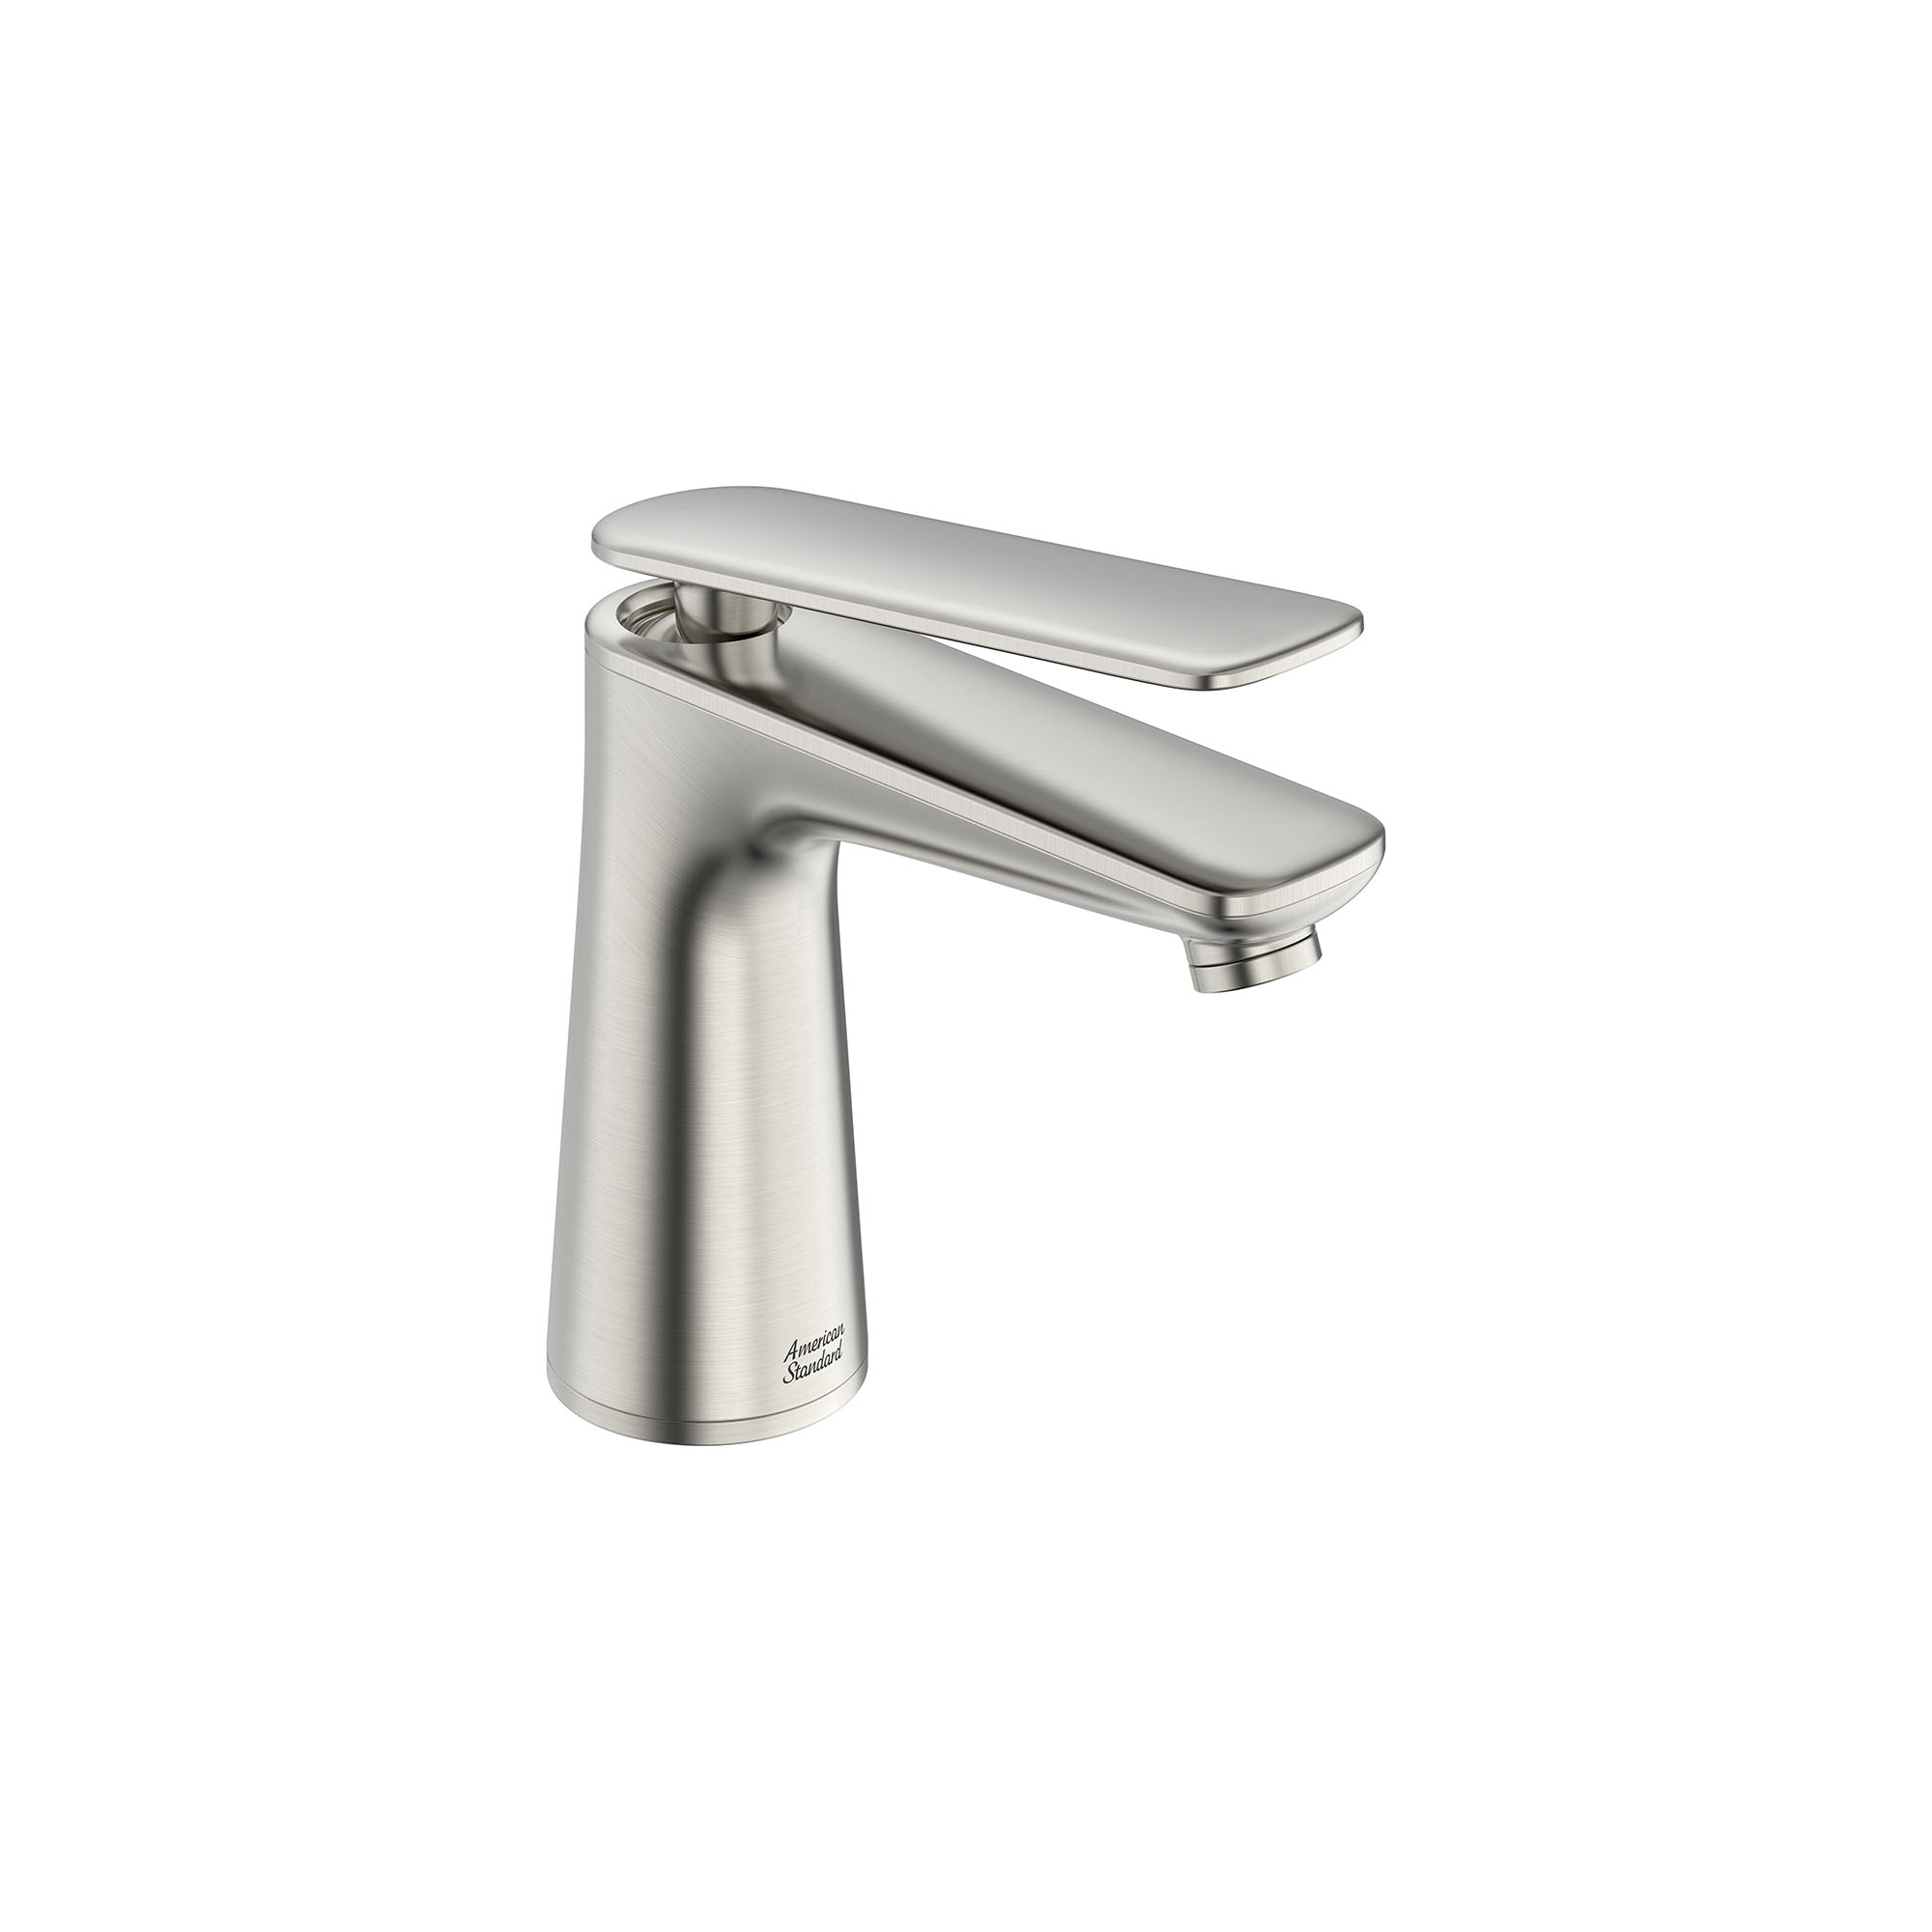 Aspirations™ Single-Handle Bathroom Faucet 1.2 gpm/4.5 L/min With Lever Handle